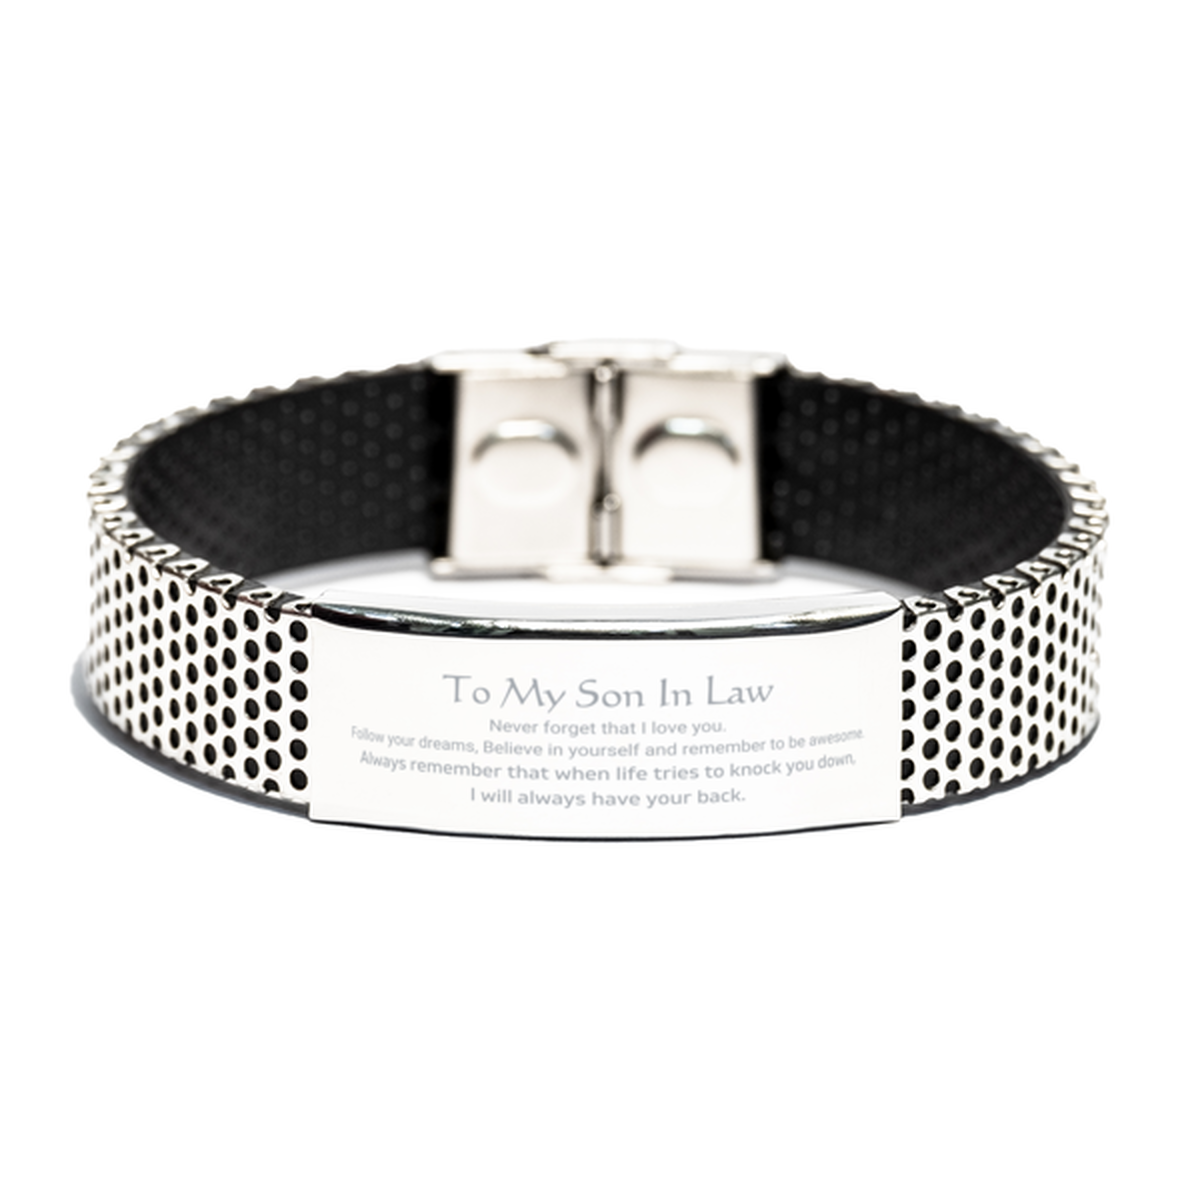 Inspirational Gifts for Son In Law, Follow your dreams, Believe in yourself, Son In Law Stainless Steel Bracelet, Birthday Christmas Unique Gifts For Son In Law